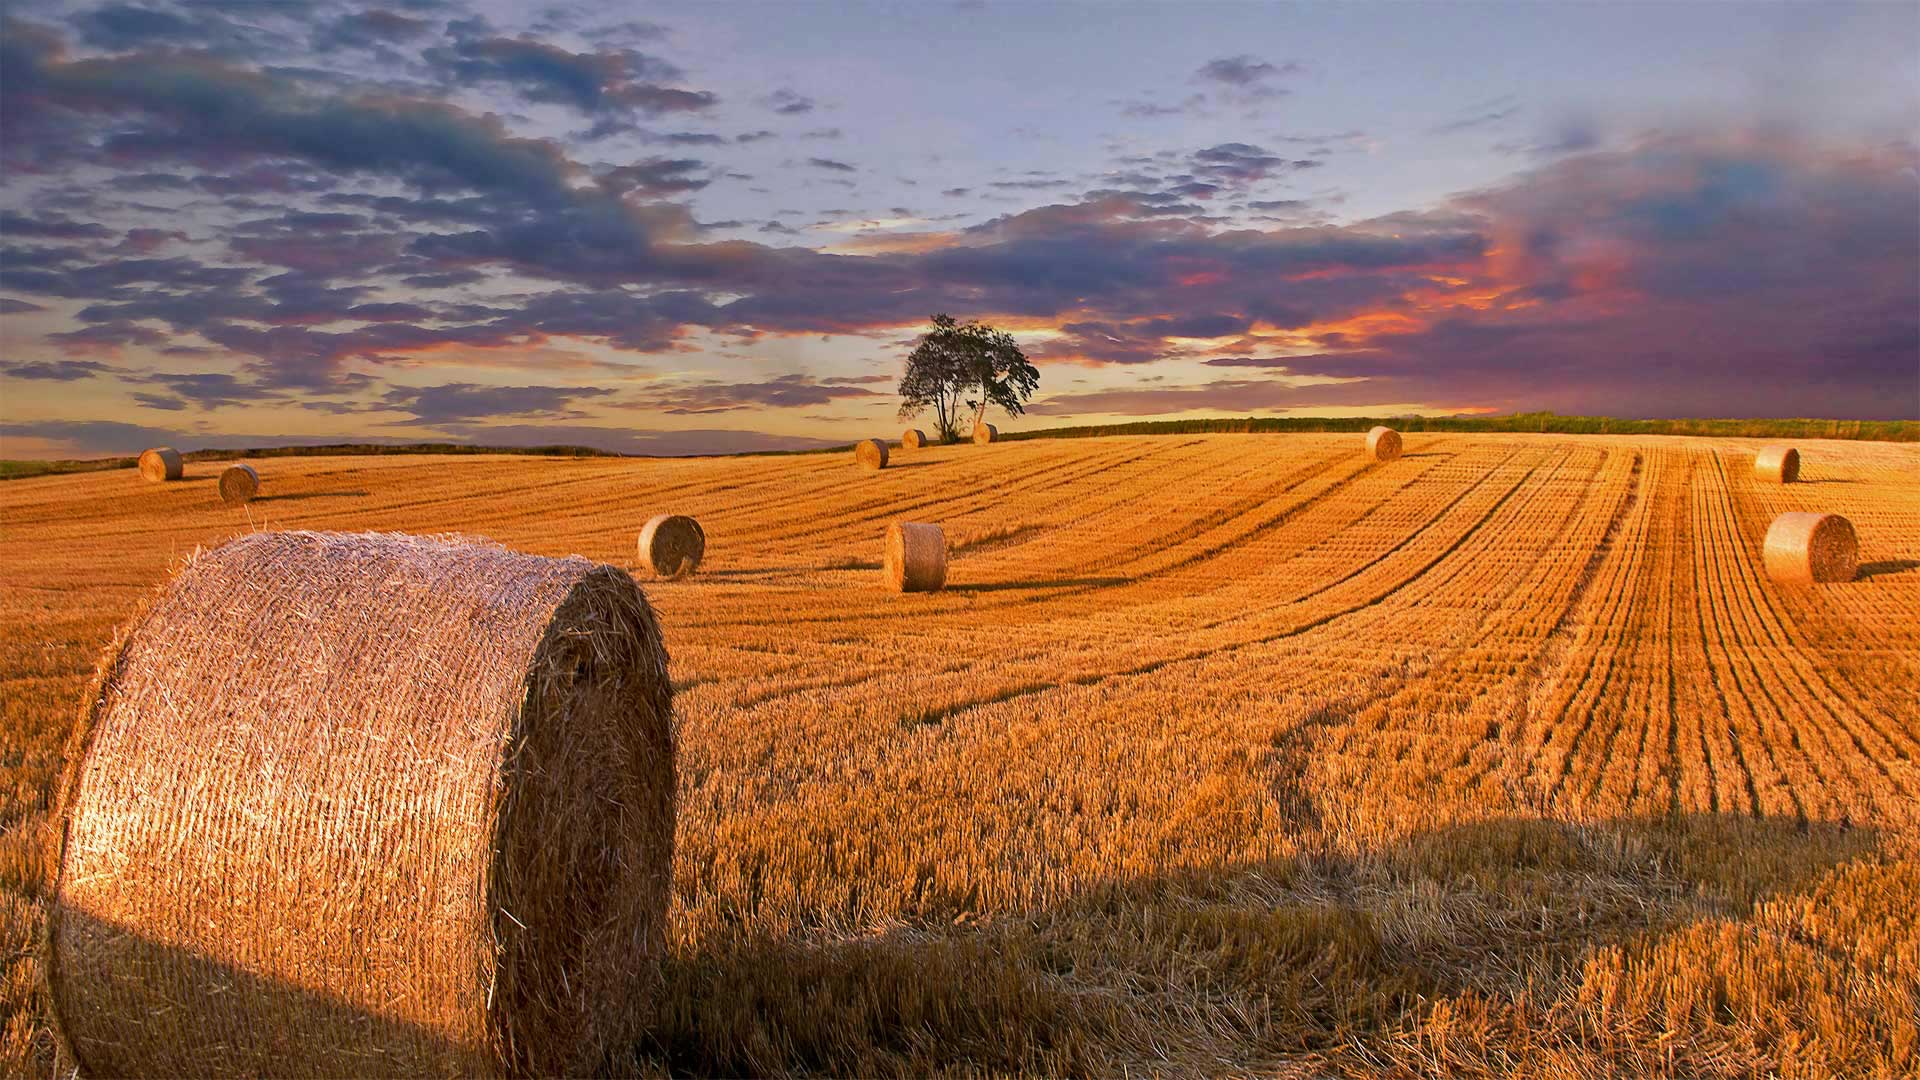 Hay bales in a field in Jutland, Denmark - Nick Brundle Photography/Getty Images)